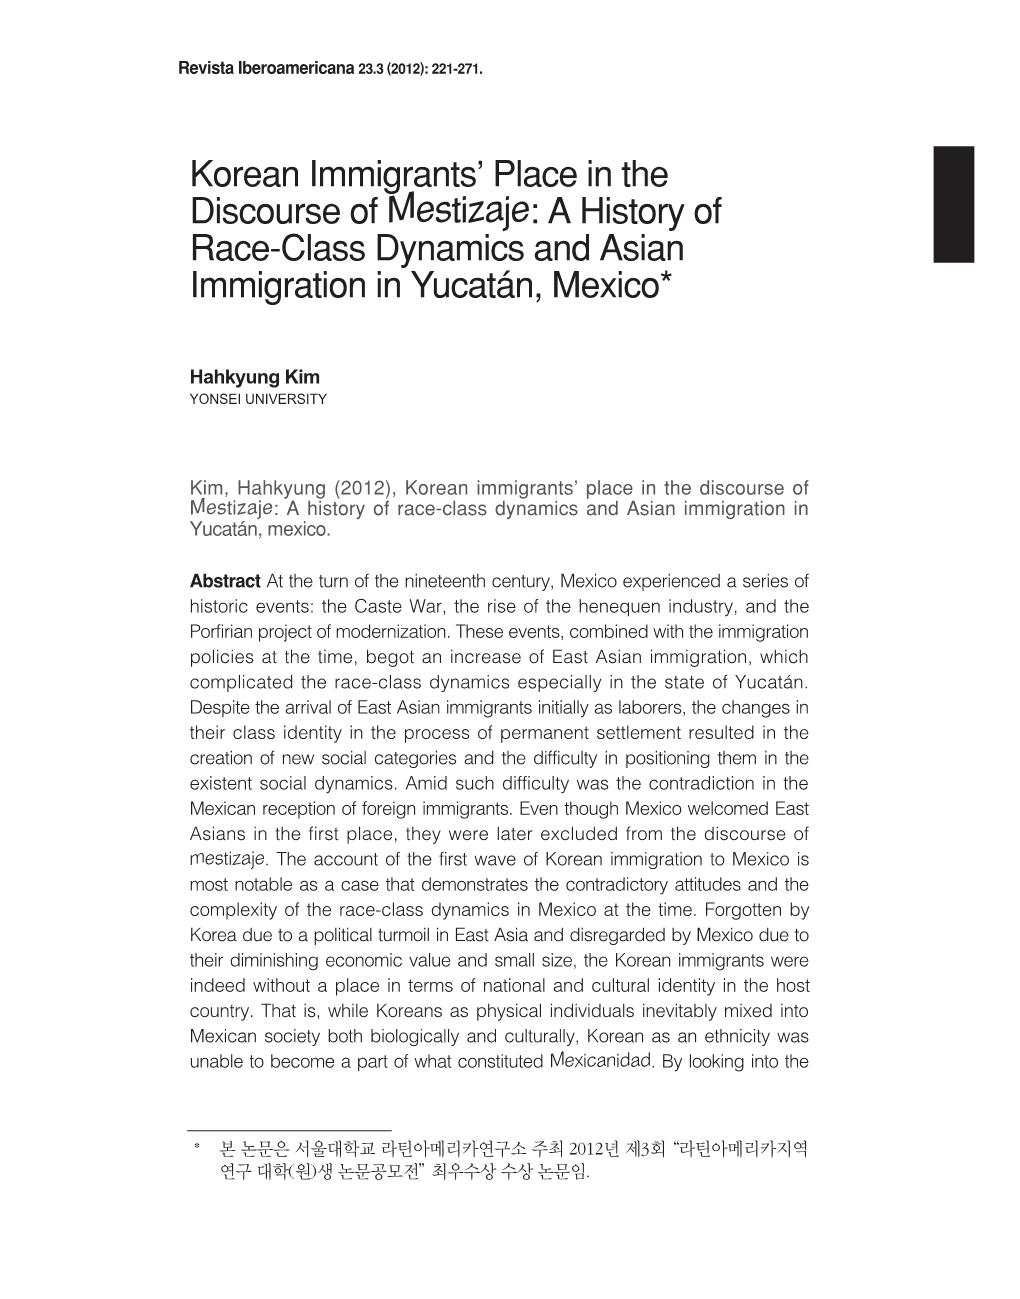 Korean Immigrants' Place in the Discourse of Mestizaje